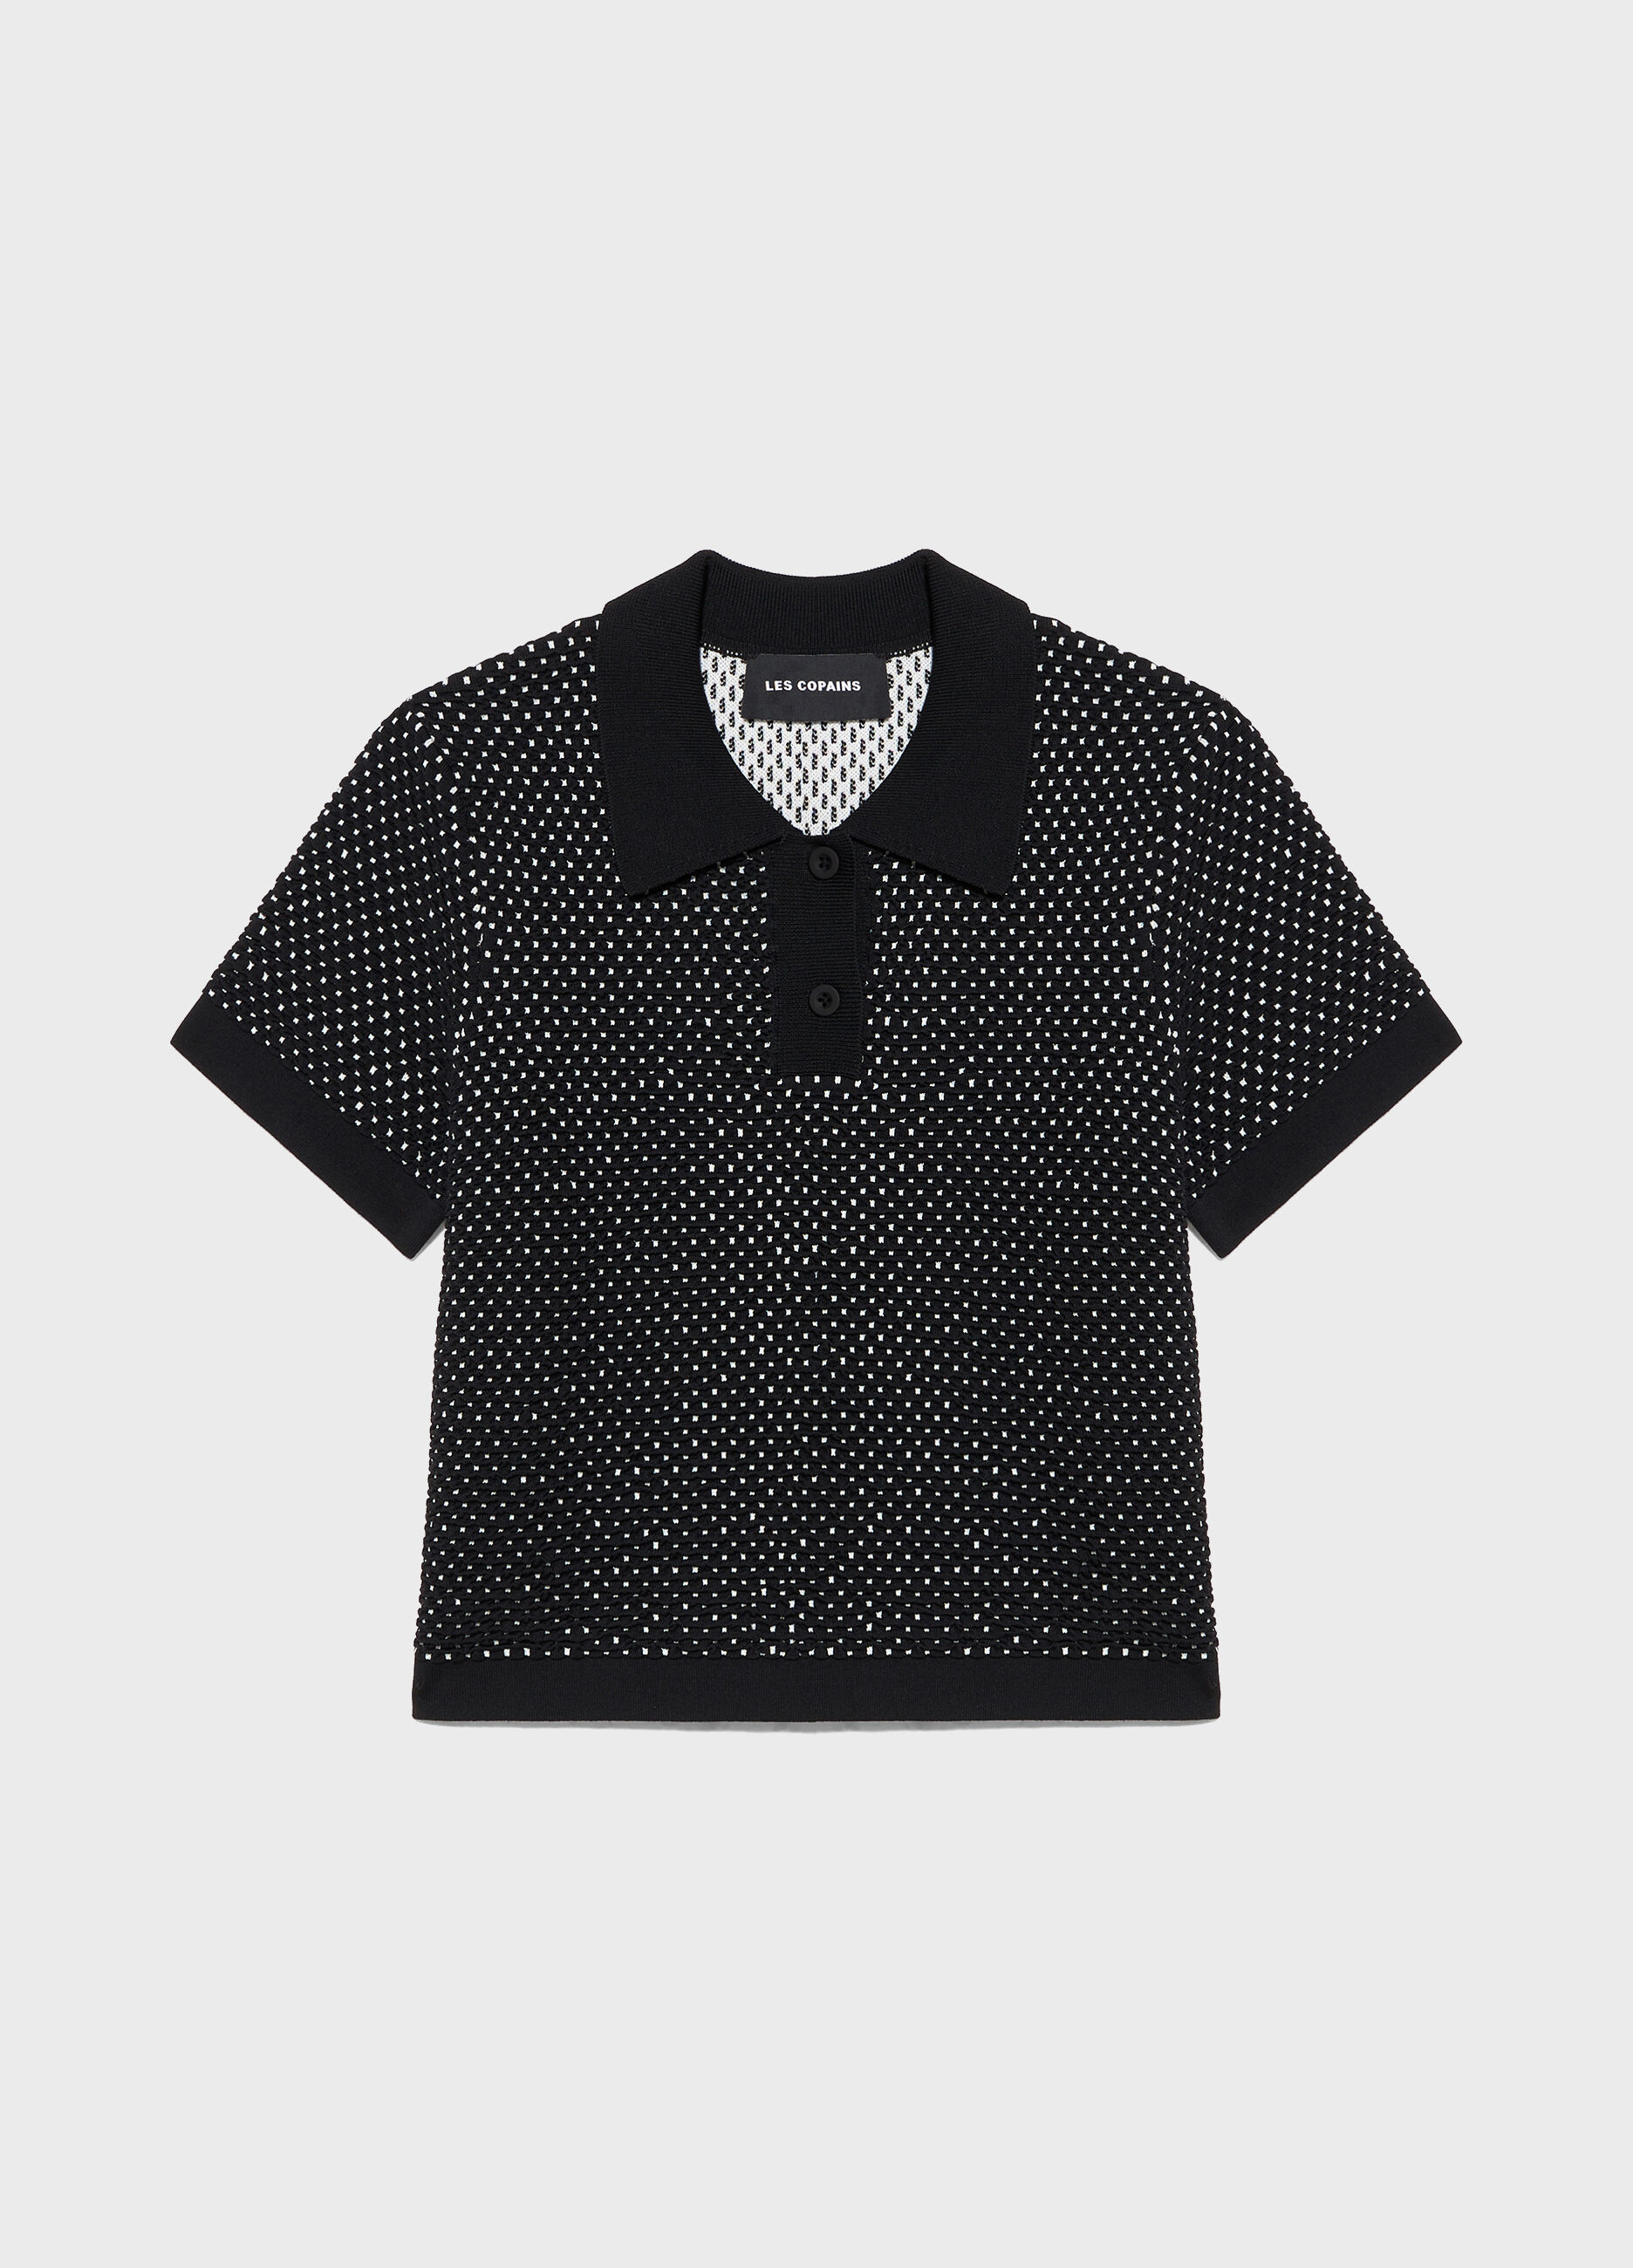 Jacquard knit tricot t-shirt with short sleeves